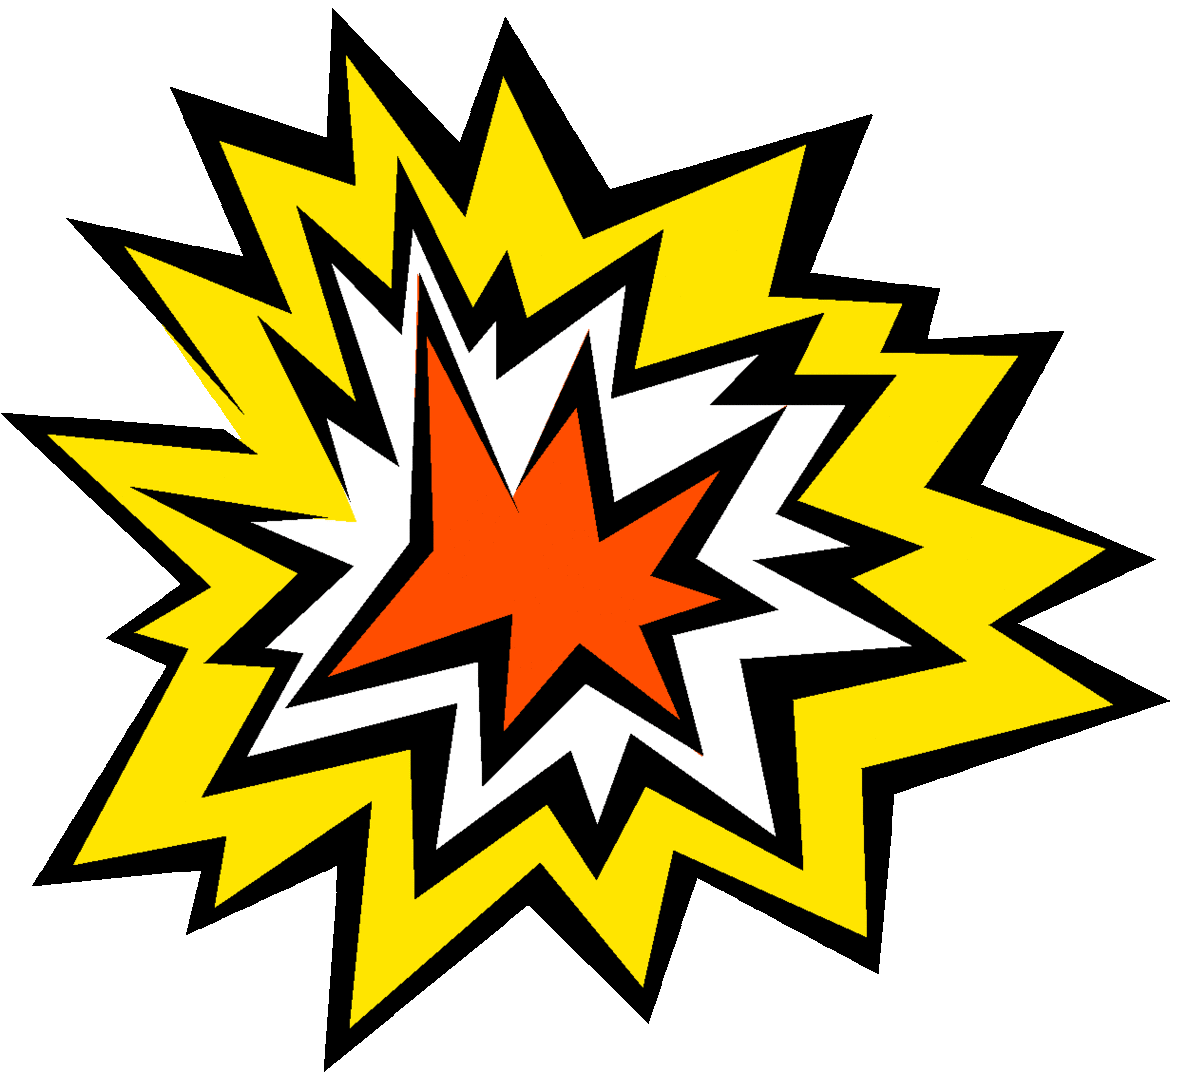 Explosion clip art free clipart to use resource